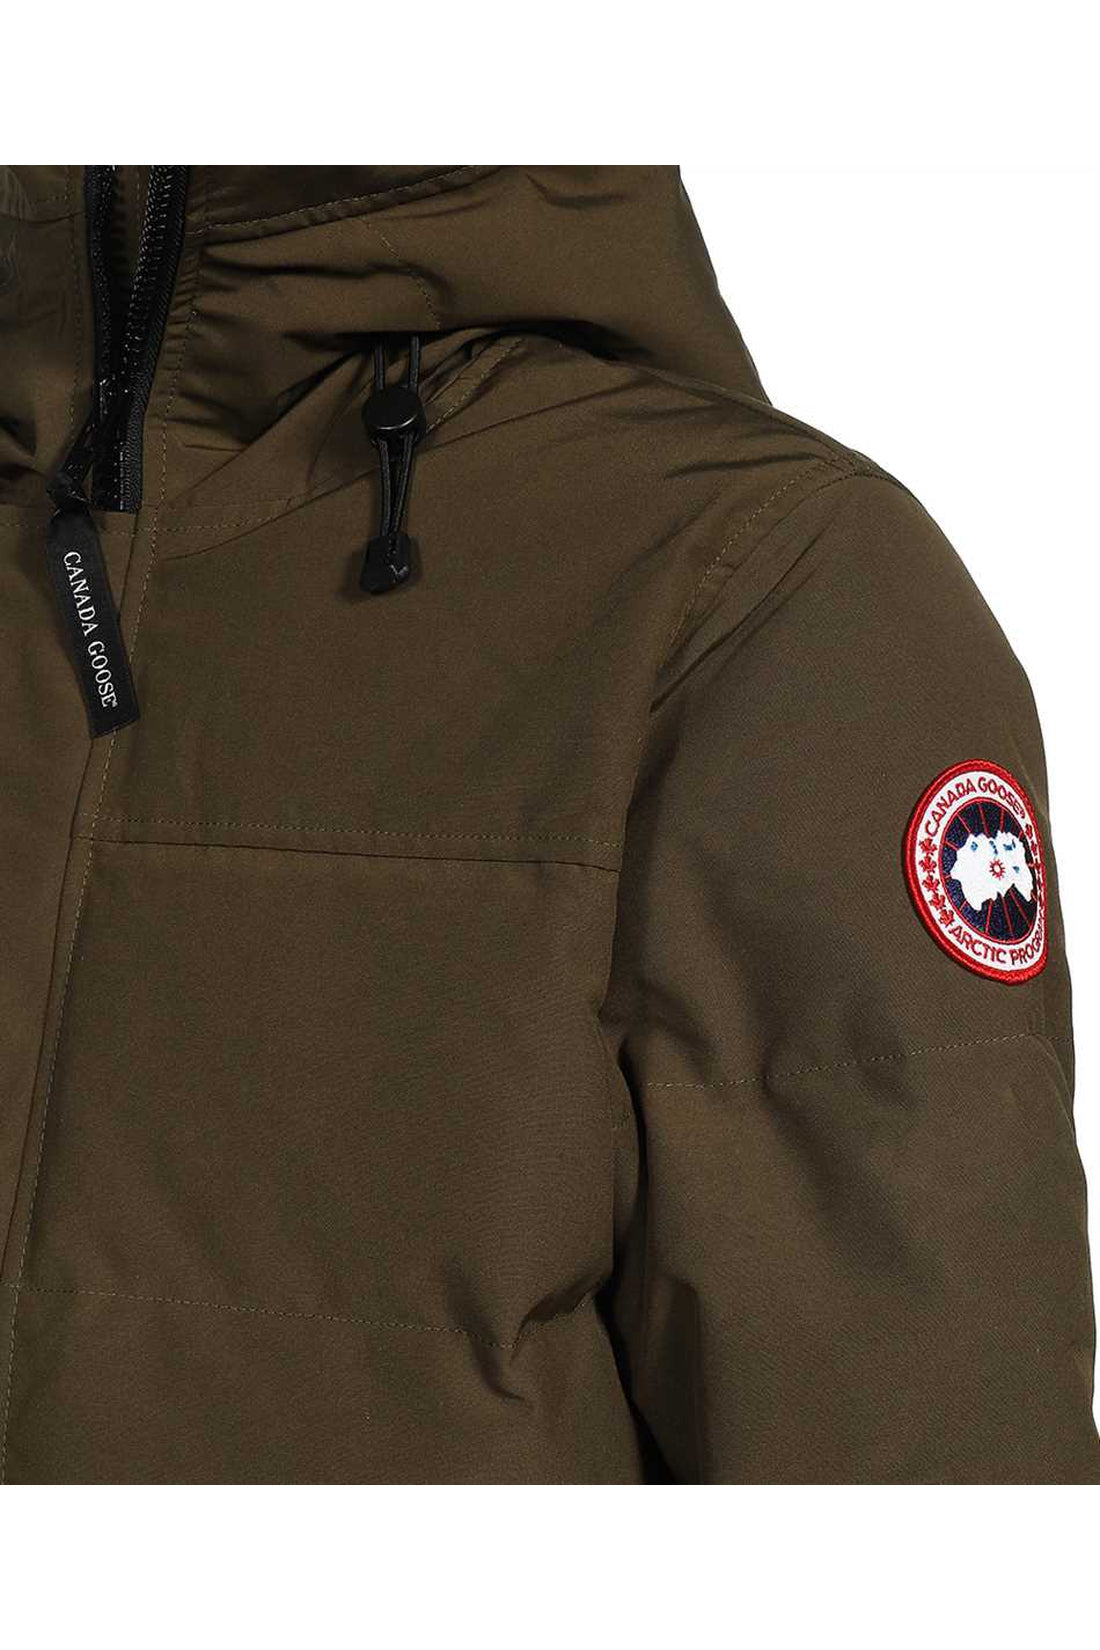 Canada Goose-OUTLET-SALE-MacMillan full zip down jacket-ARCHIVIST